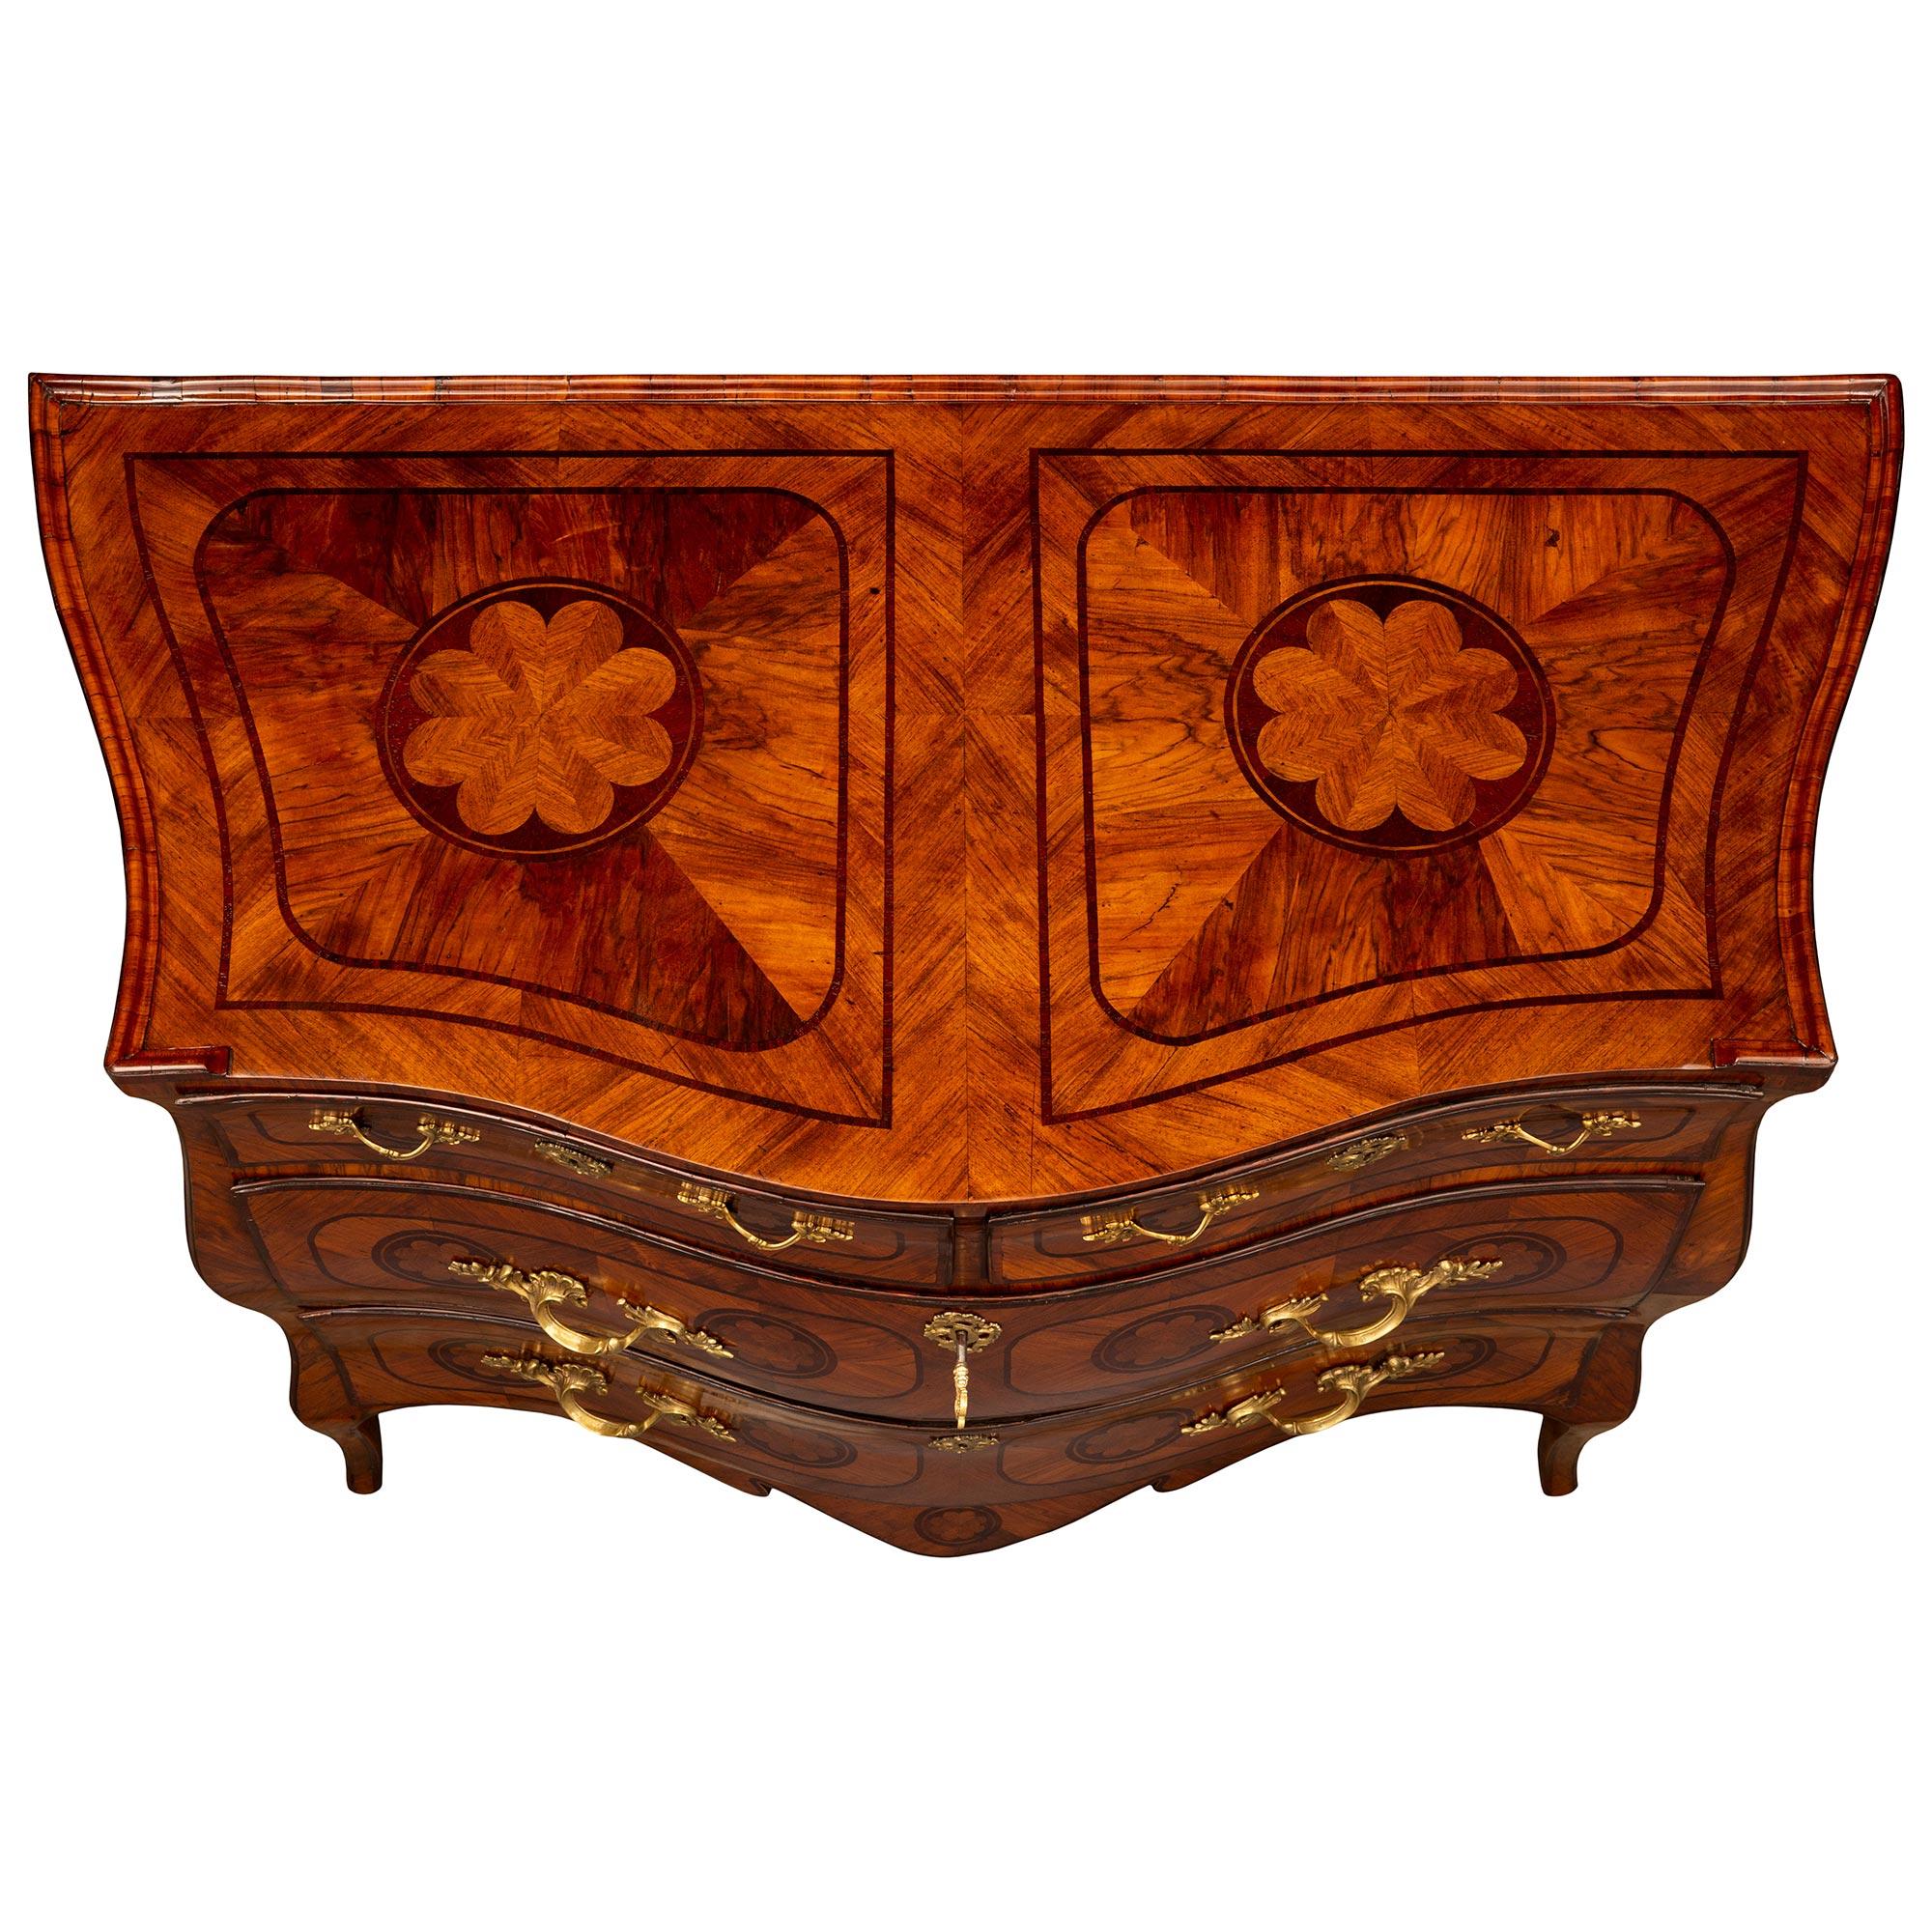 A magnificent Italian 18th century Louis XV period Fruitwood, Kingwood, and ormolu commode from Naples, circa 1760. The four drawer chest is raised by elegant cabriole legs leading to a beautiful scalloped shaped apron. Each of the drawers is